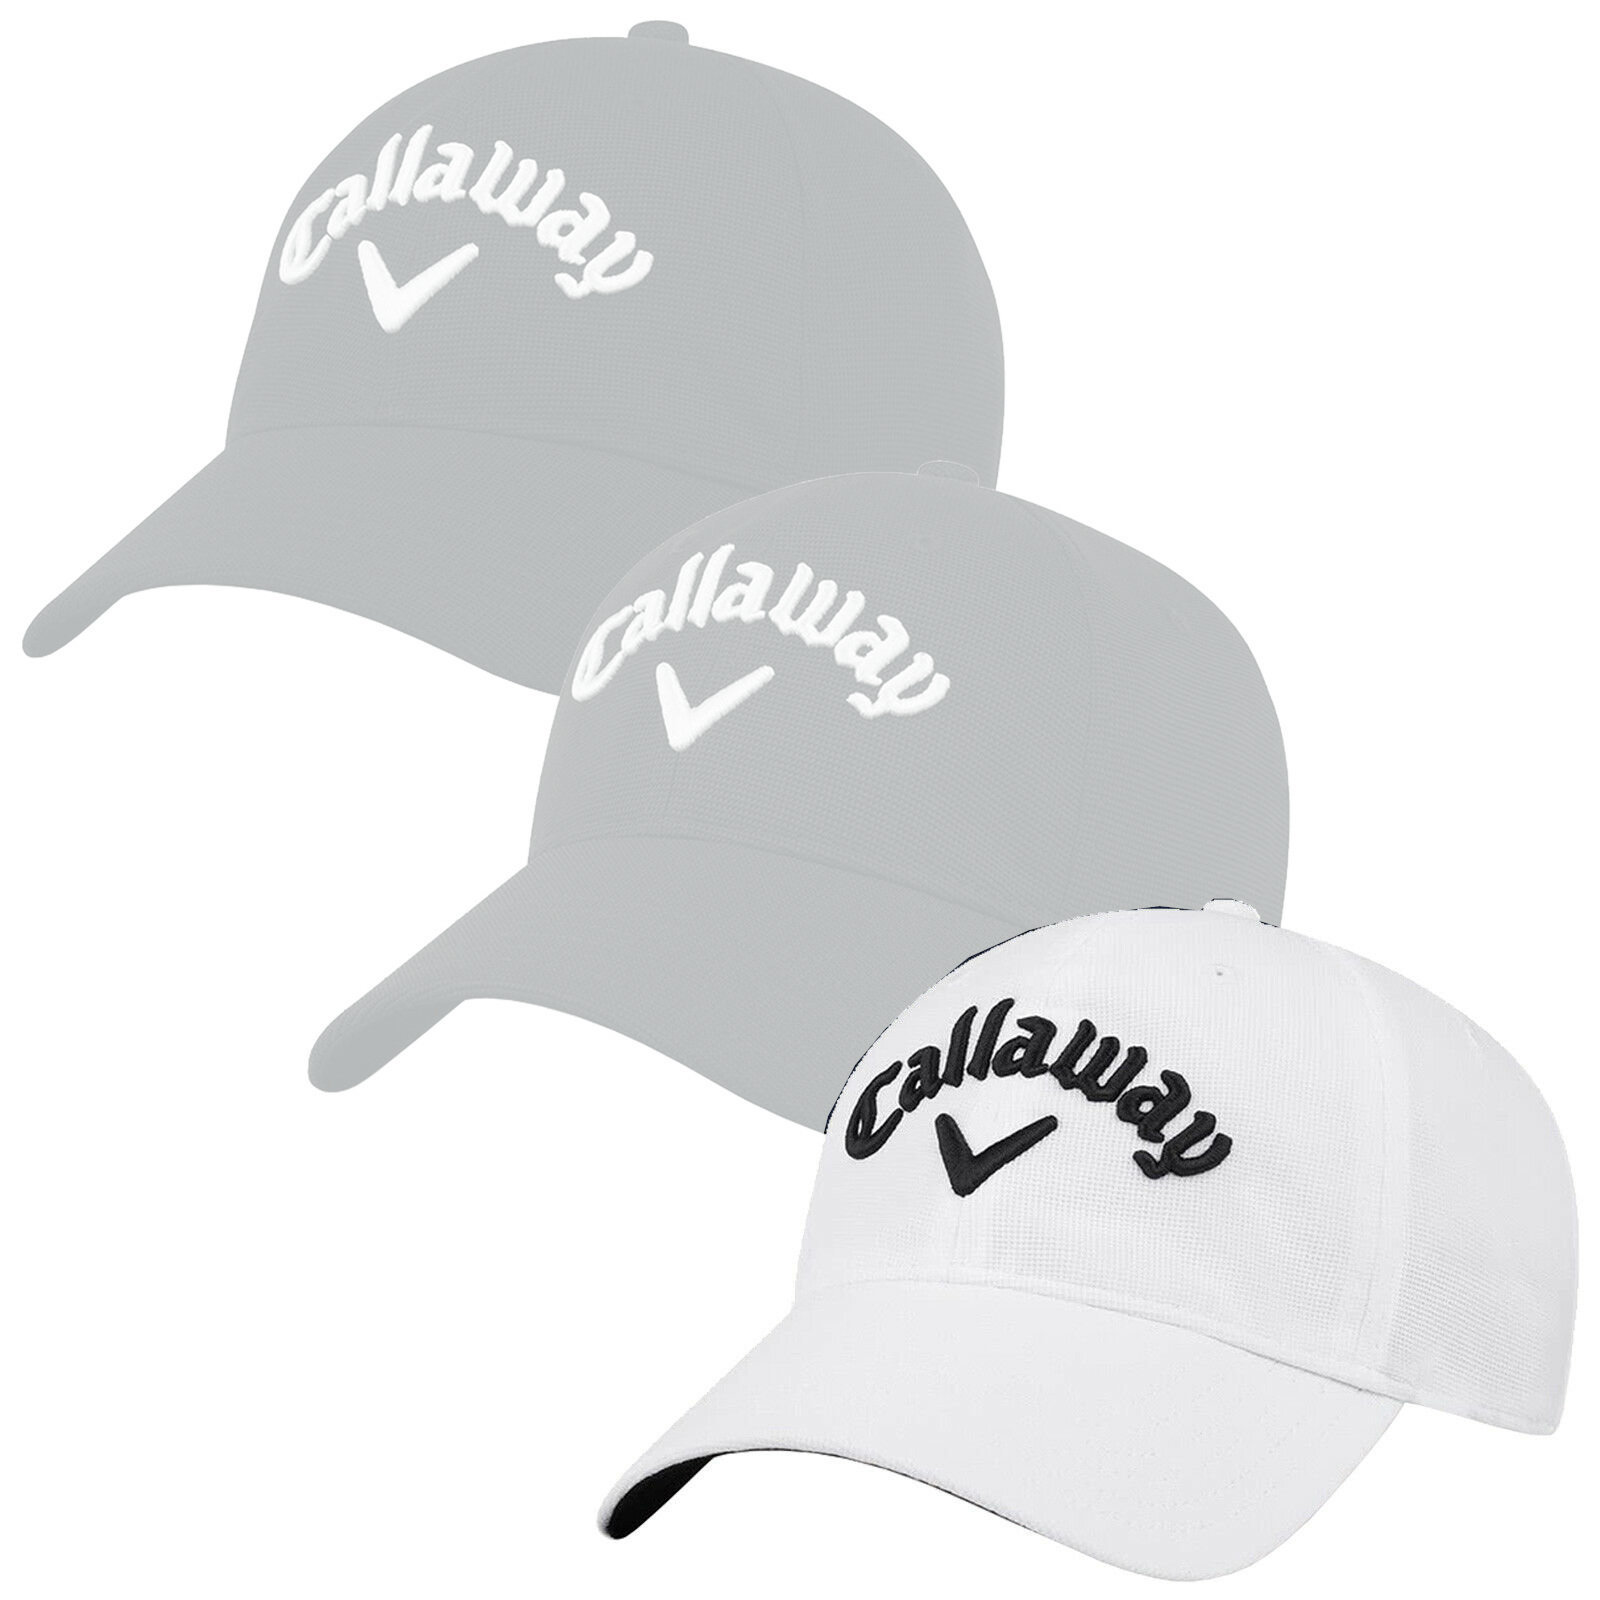 Šilterica Callaway Womens Side Crested Cap White